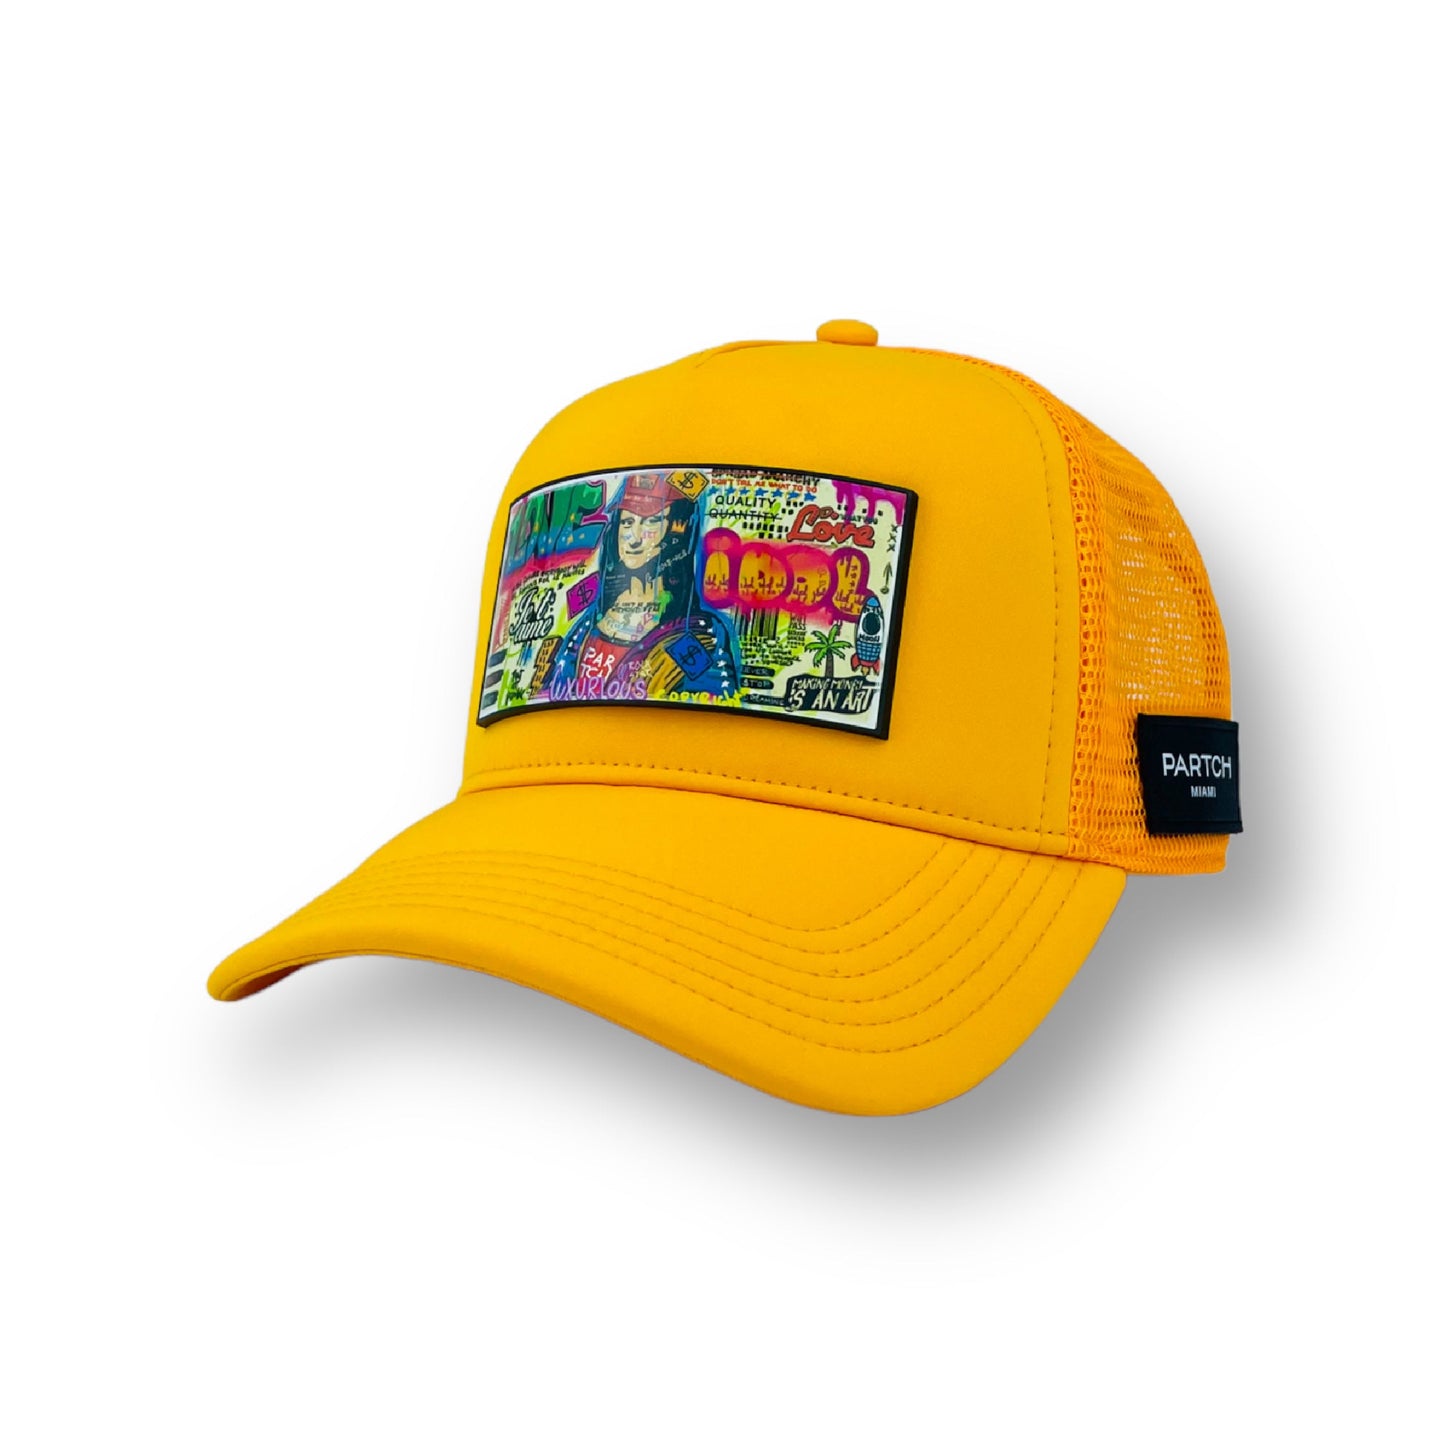 Yellow Mona Lisa trucker hat by Partch fashion